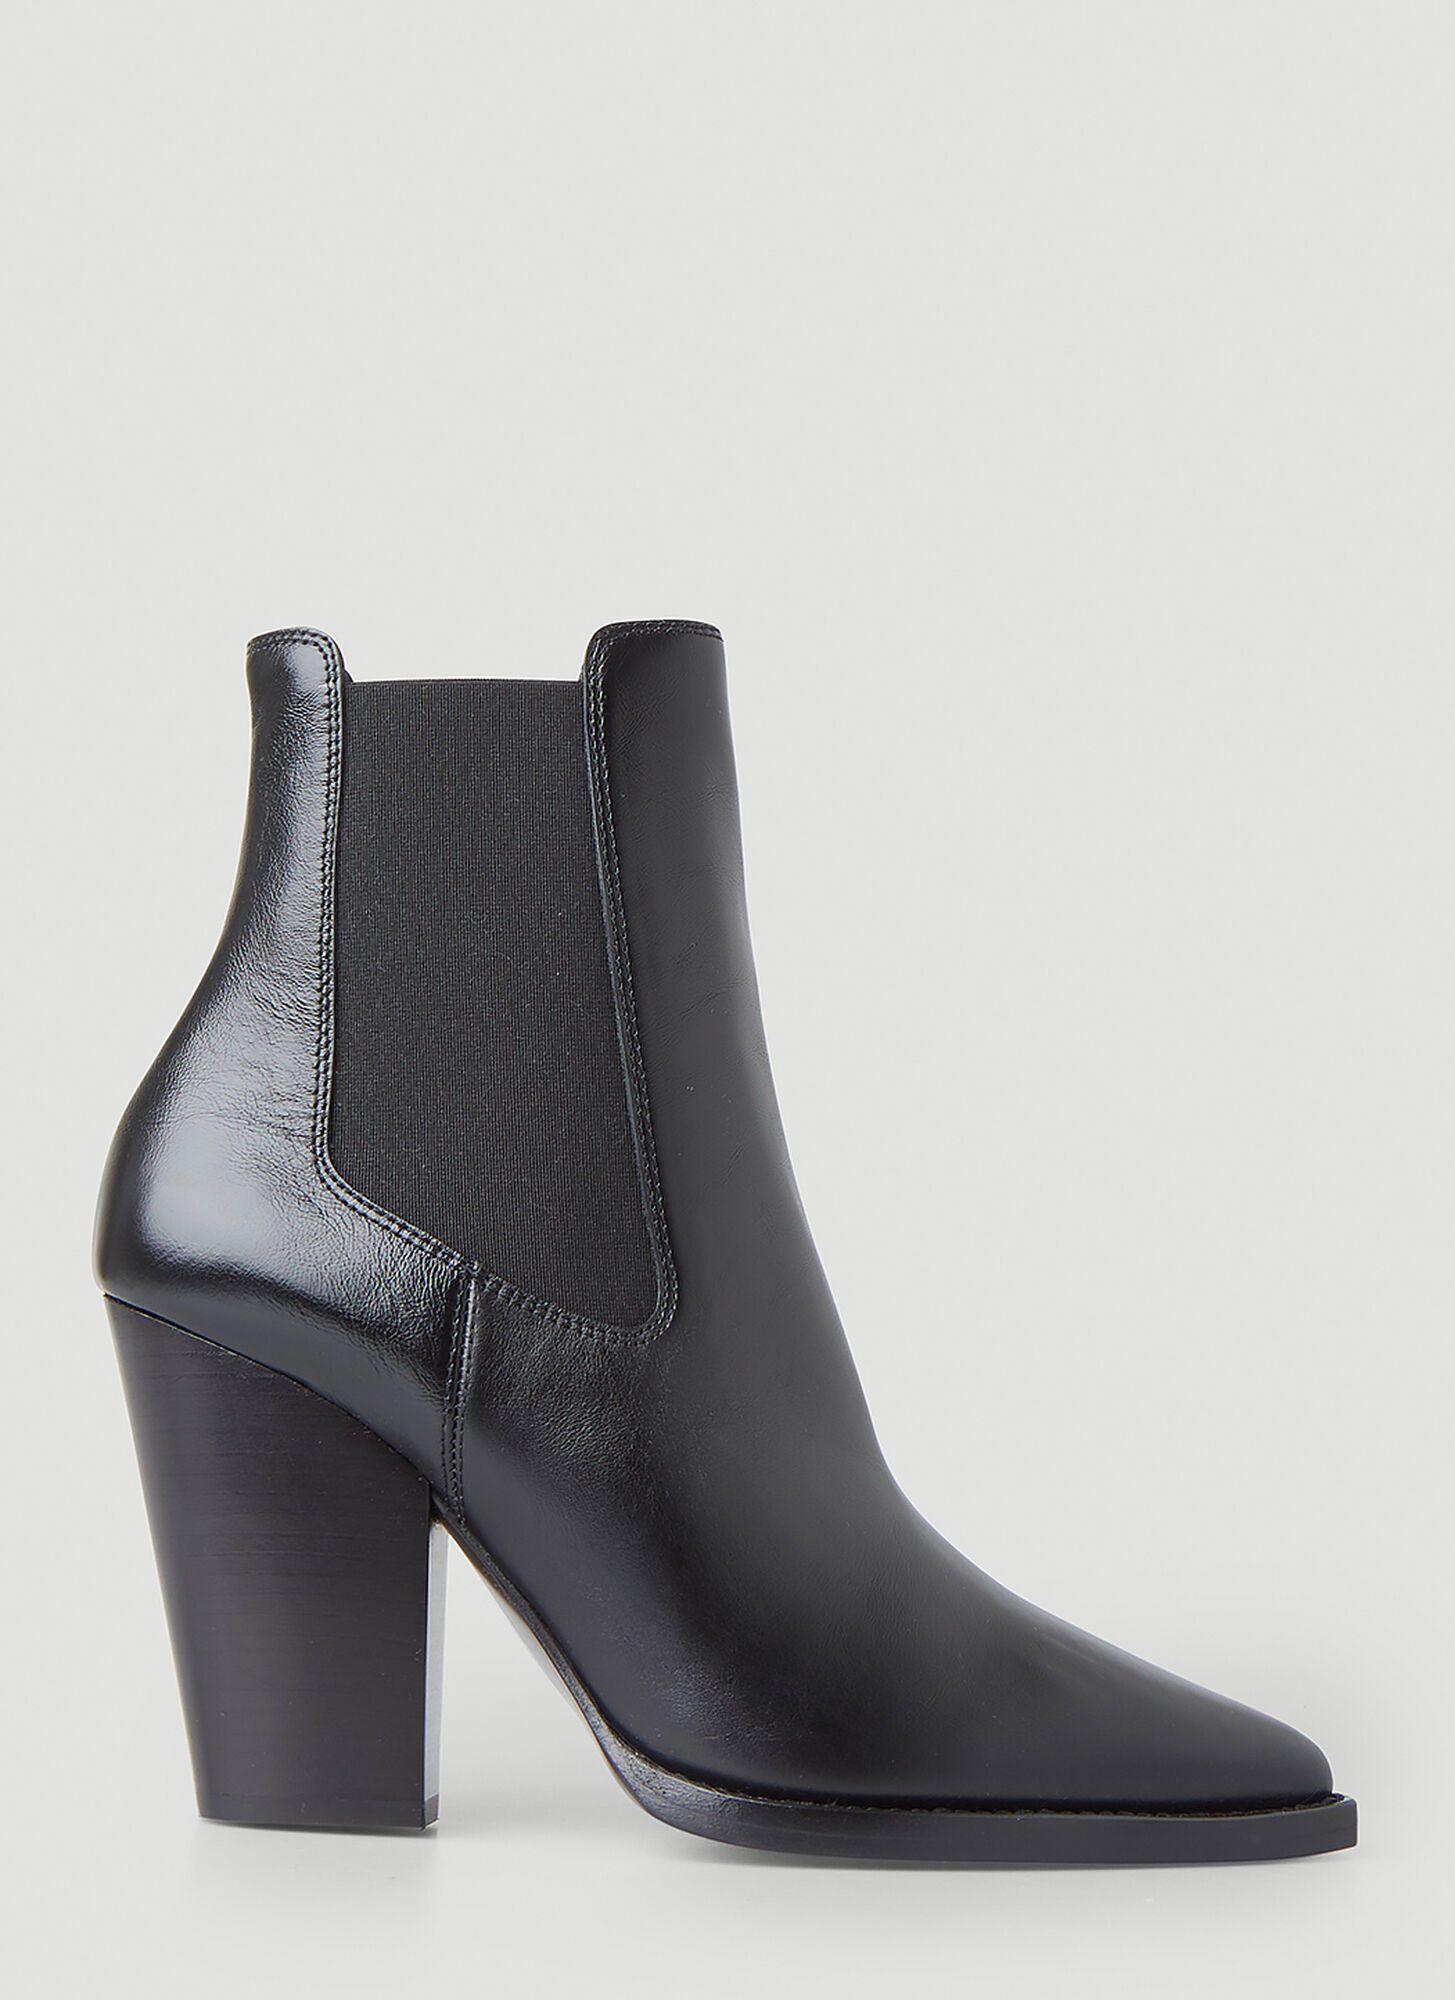 SAINT LAURENT THEO ANKLE BOOTS